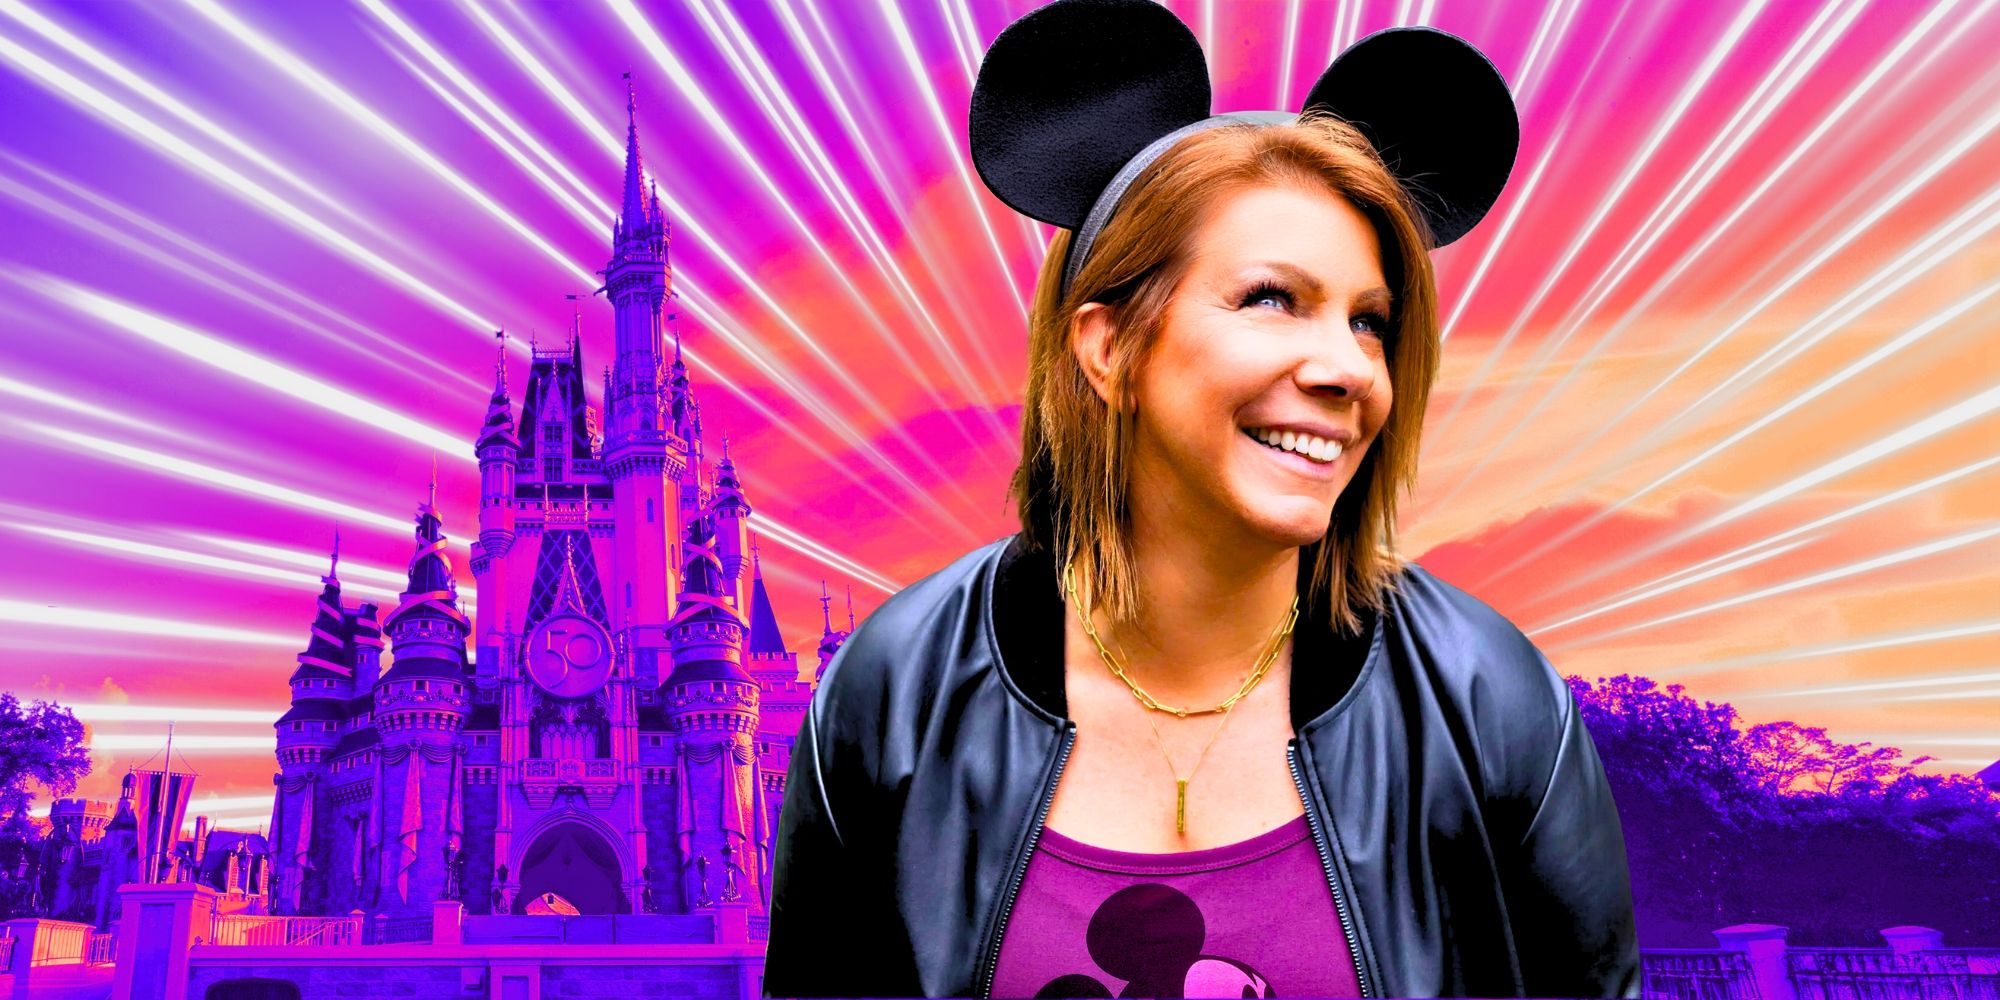 Sister Wives' Meri Brown in Disney montage featuring minnie mouse ears and the magic kingdom